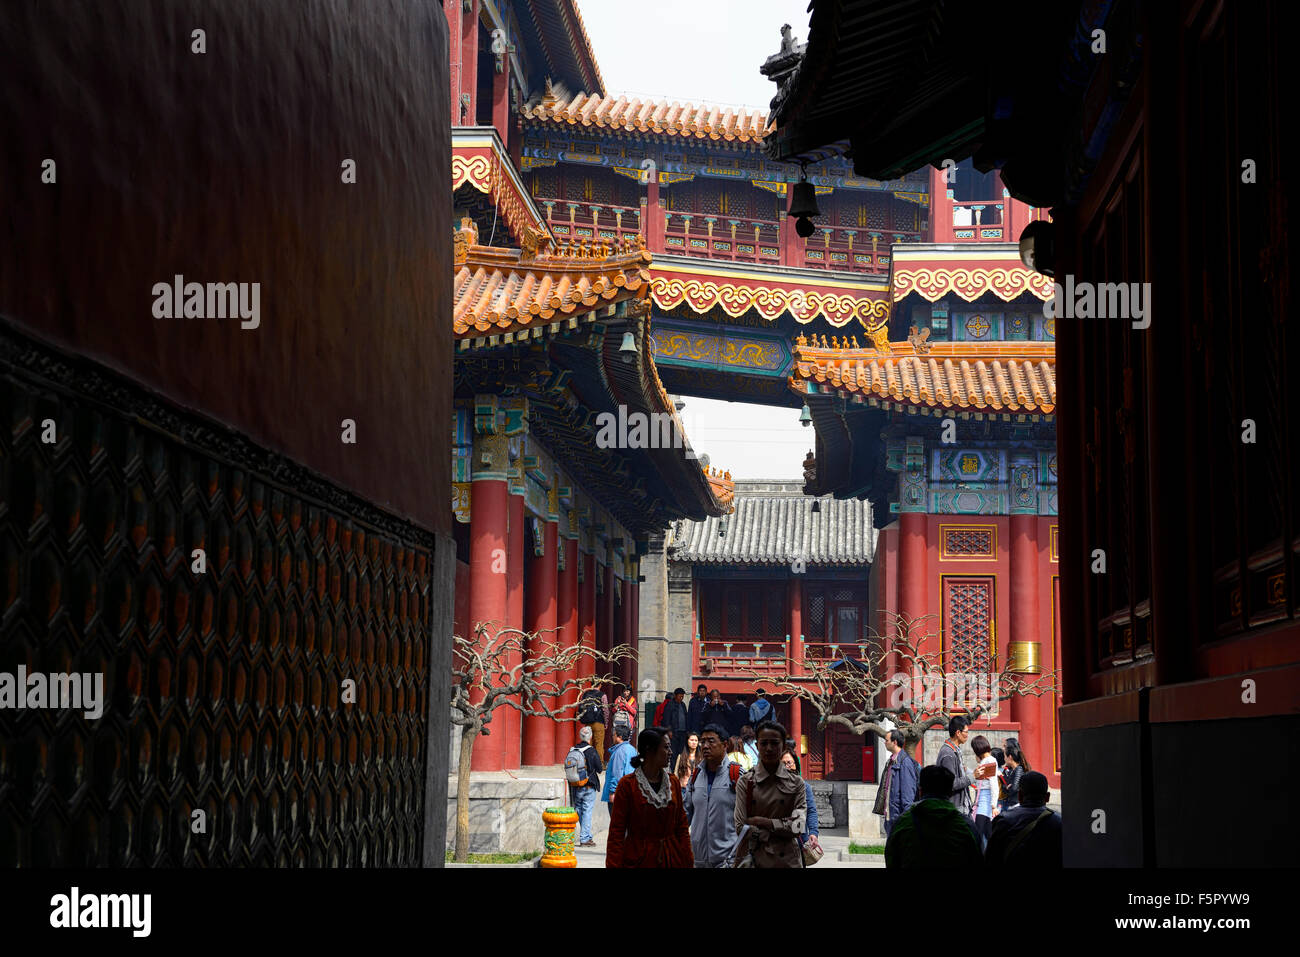 The Yonghe Temple Palace of Peace and Harmony Lama Lamasery Buddhist Buddhism Beijing China religion RM Asia Stock Photo